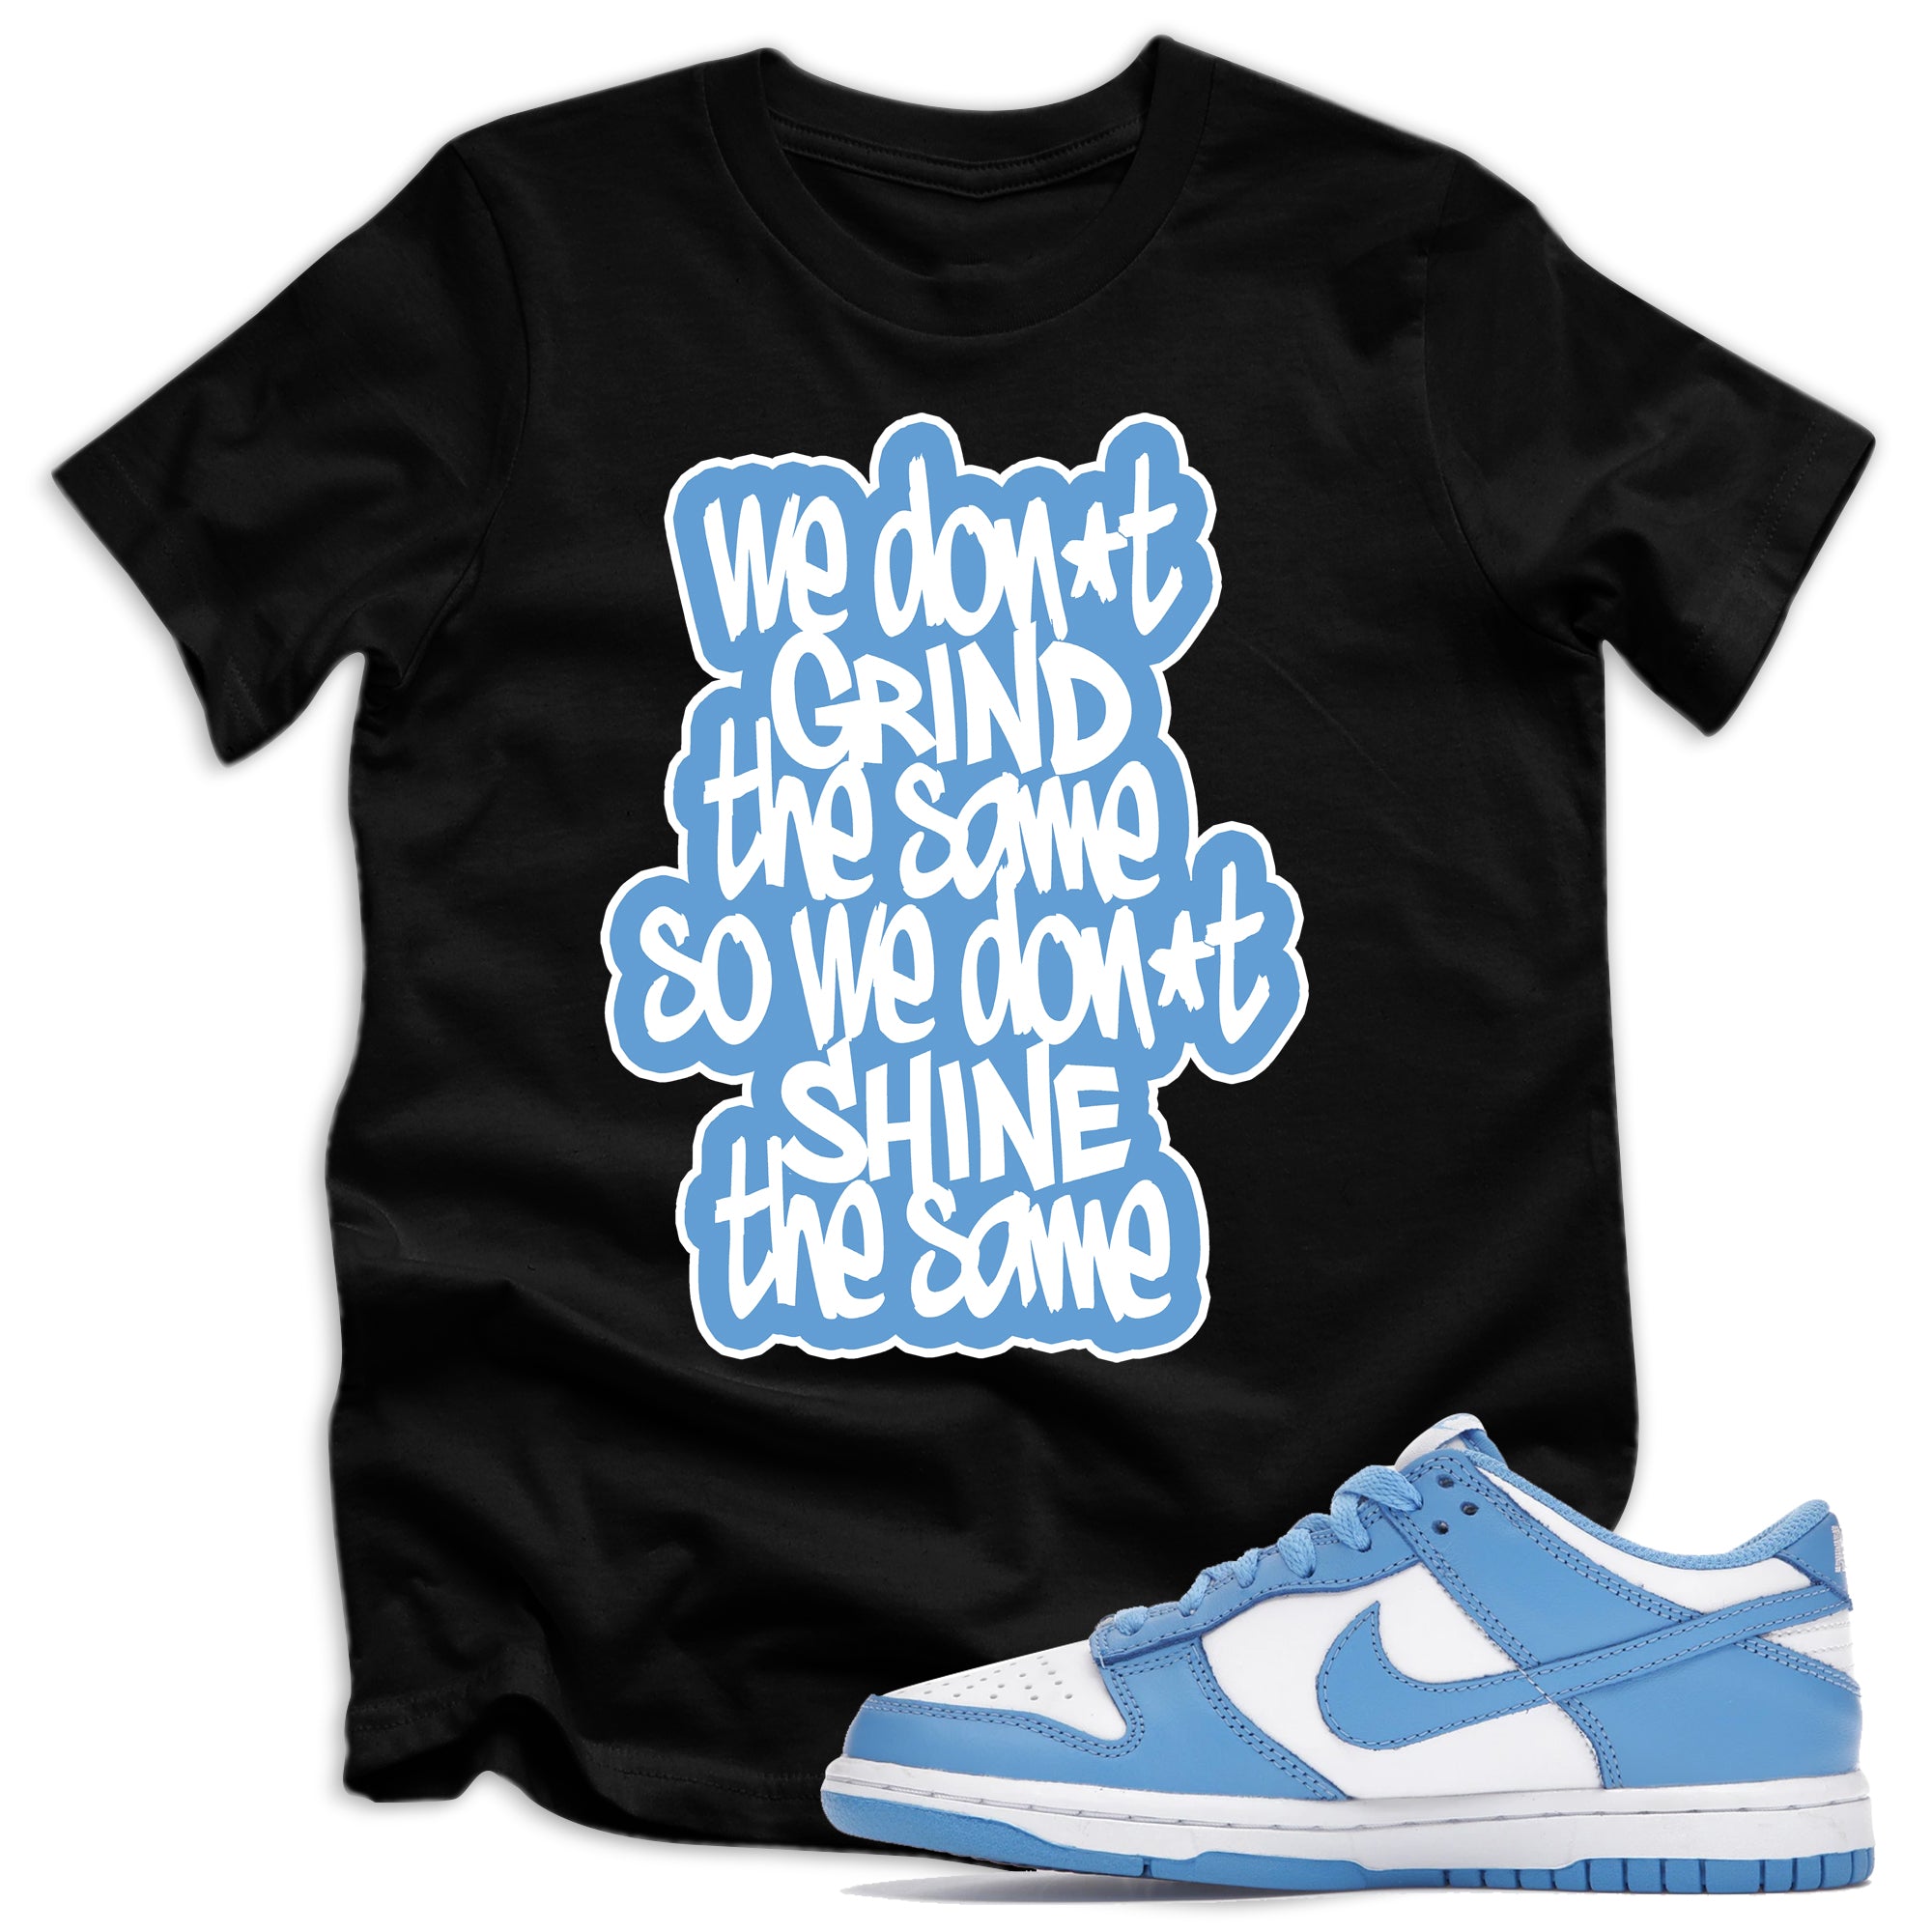 Youth We Grind Shirt Nike Dunks Low UNC photo